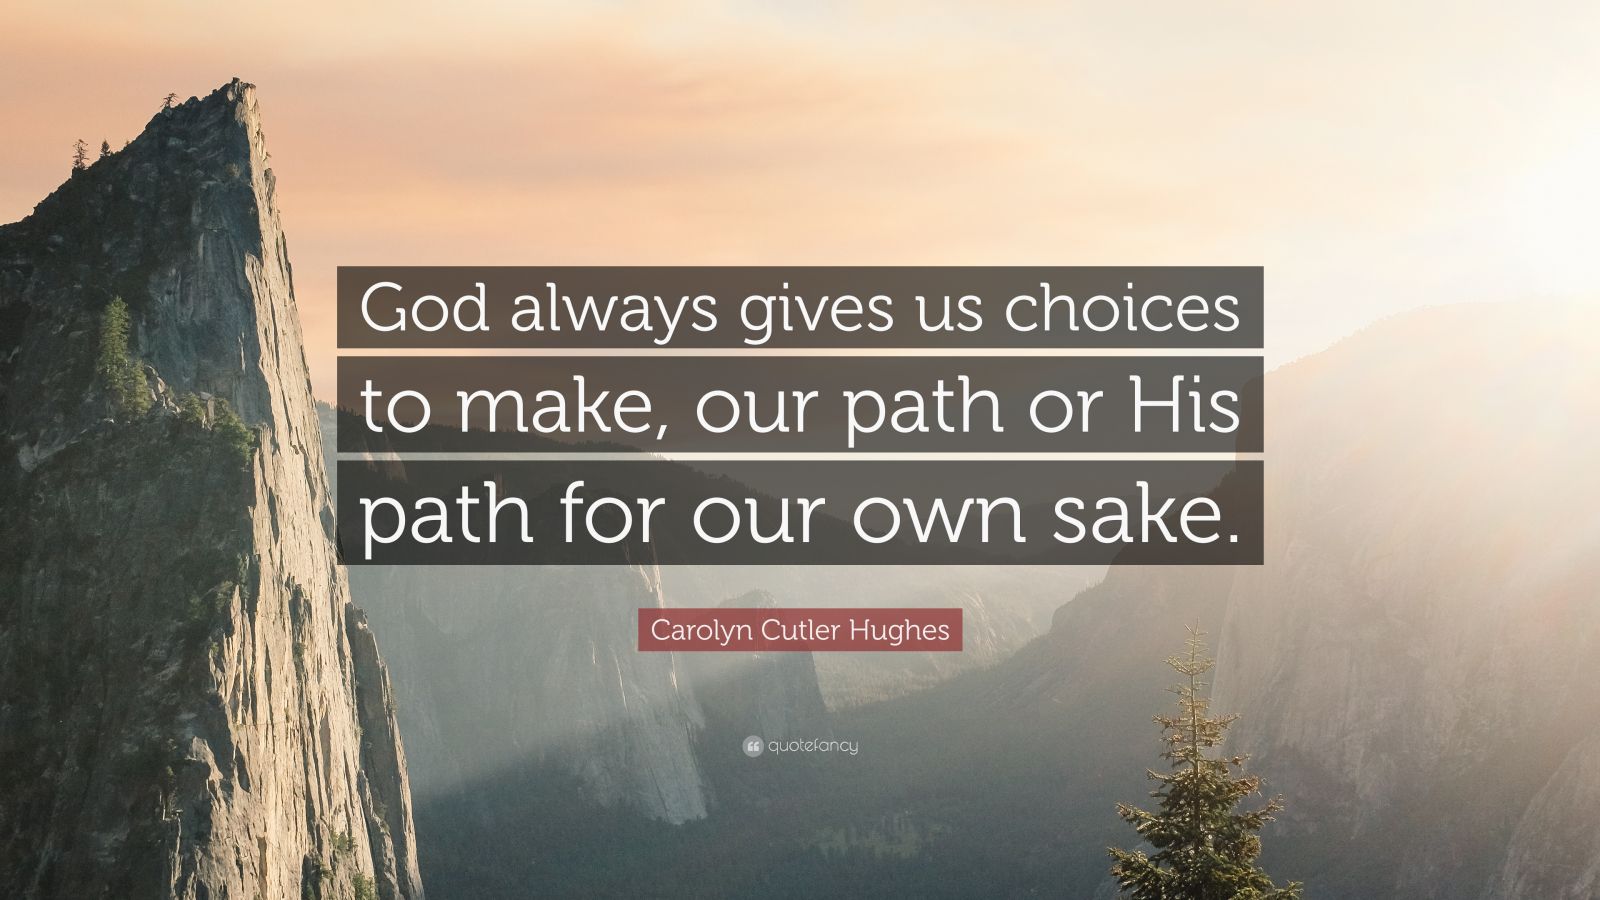 Carolyn Cutler Hughes Quote: “God always gives us choices to make, our ...